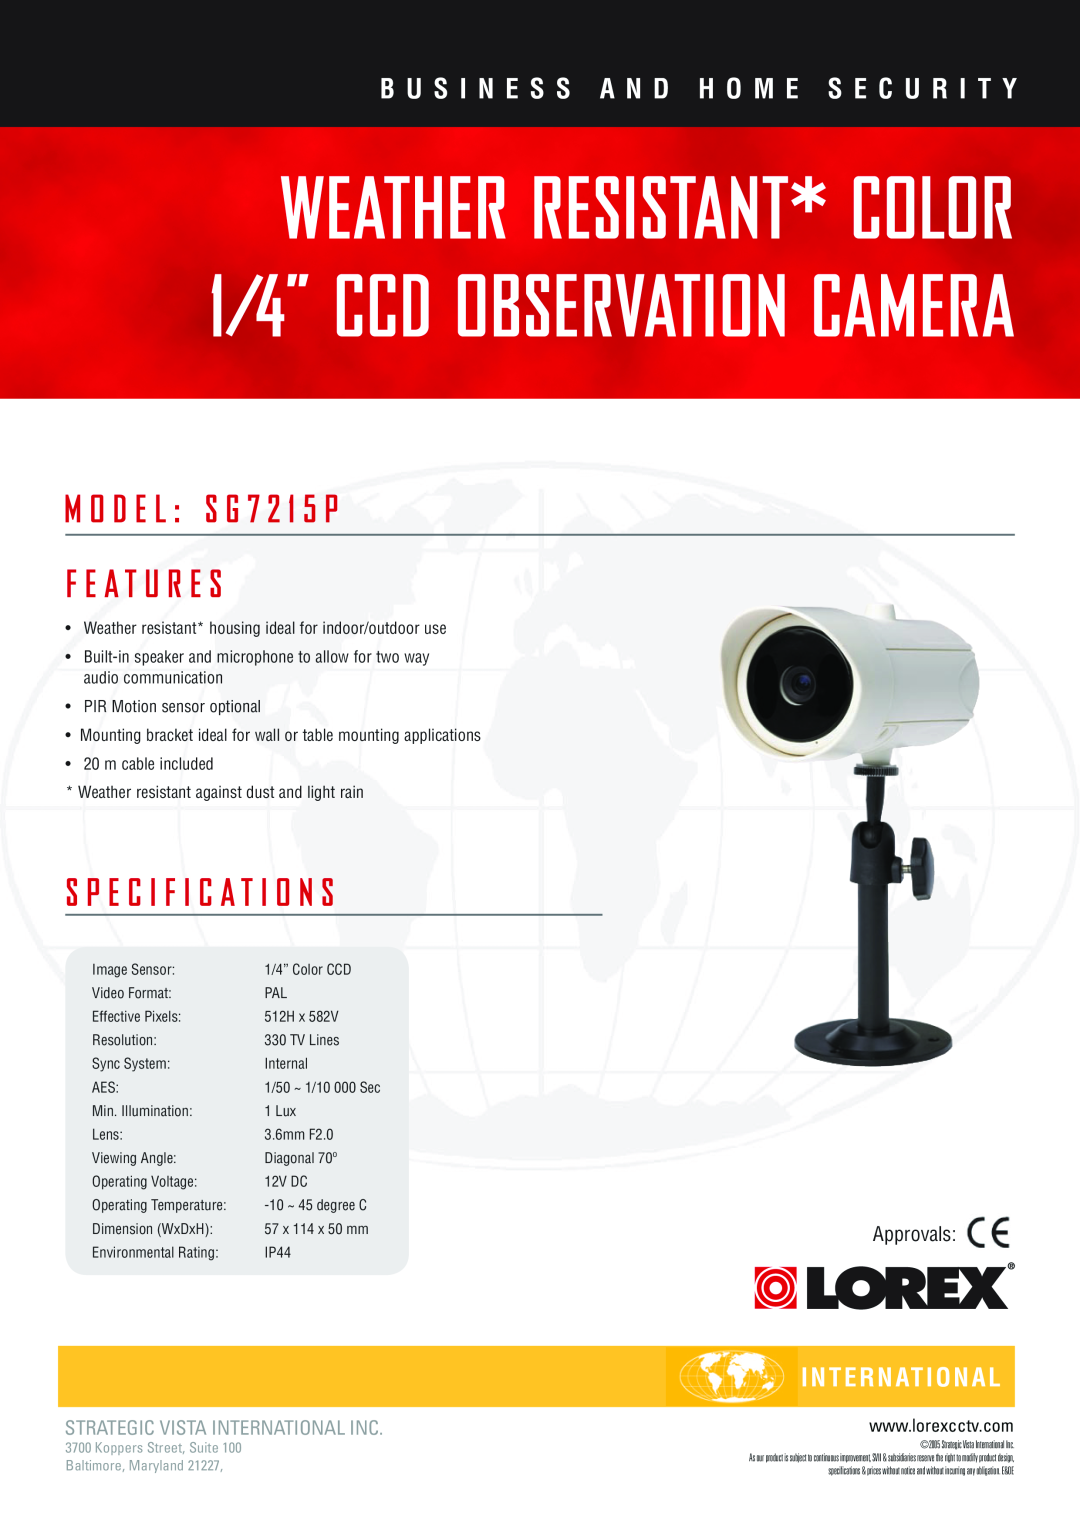 LOREX Technology SG7215P specifications WEATHER RESISTANT* COLOR 1/4” CCD OBSERVATION CAMERA, M O D E L S G 7 2 1 5 P 